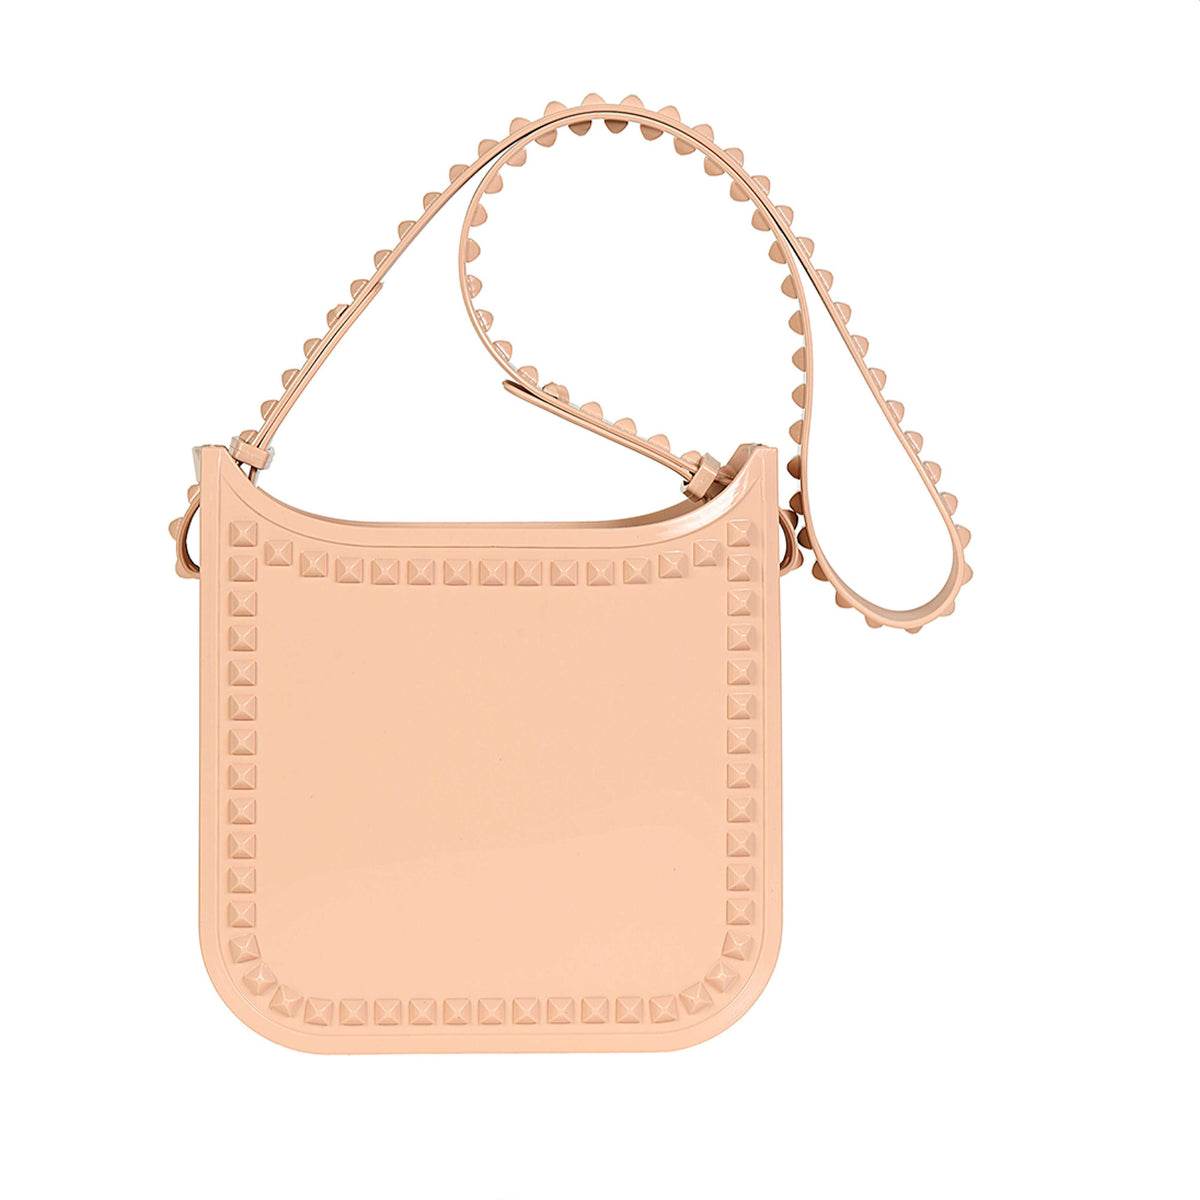 Carmen Sol jelly bags in color blush with studs